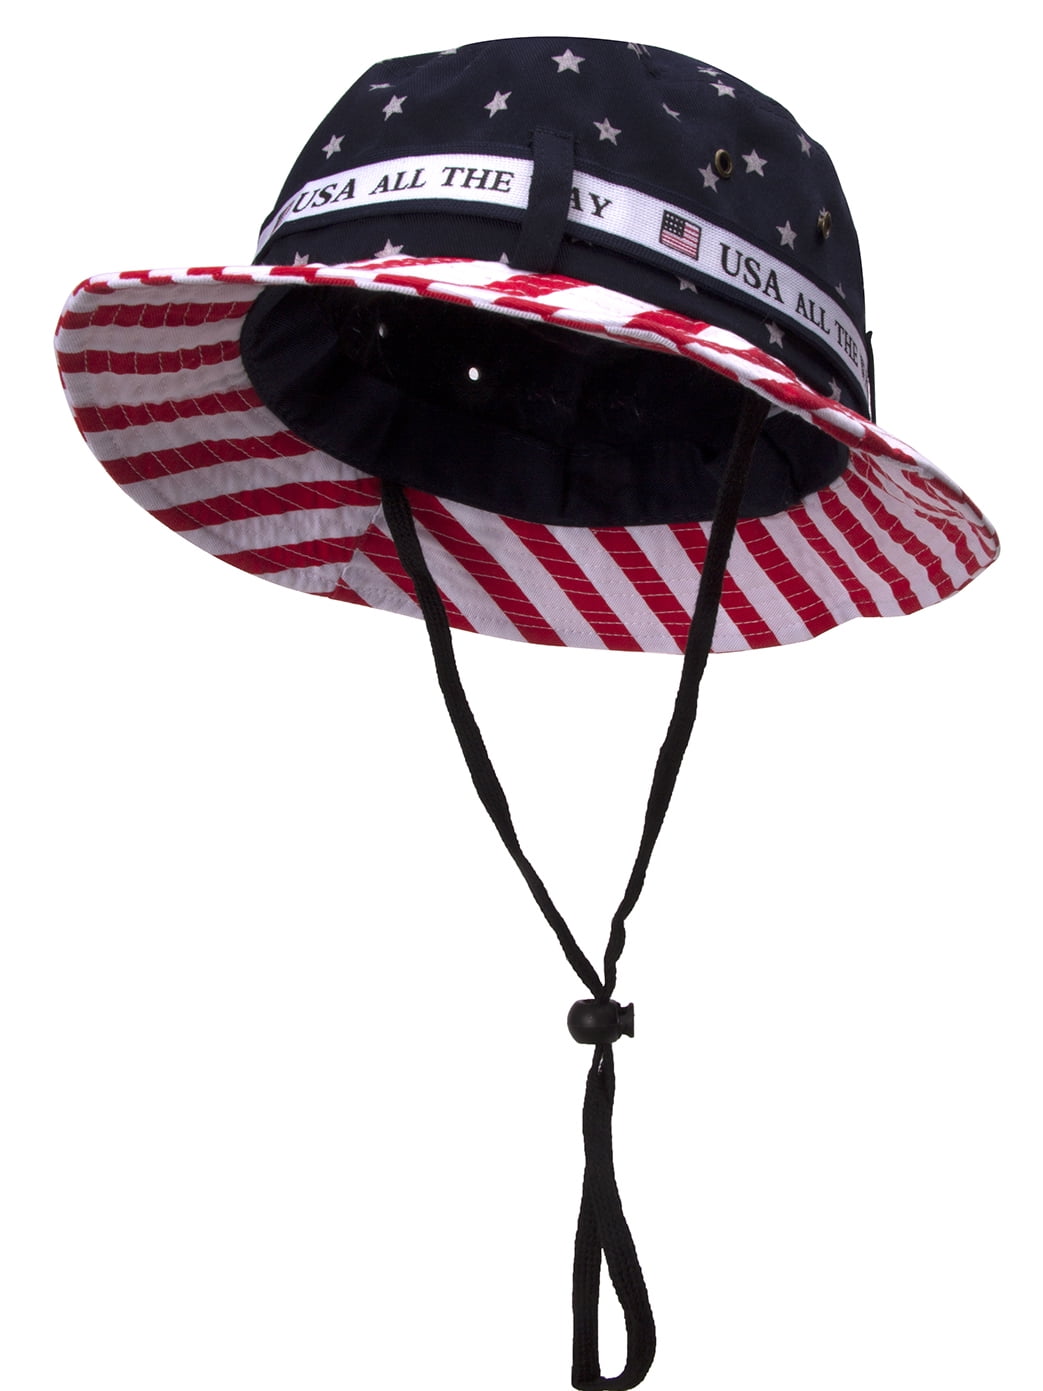 NEW ADULT SIZE 7 3/8 . USA COUNTRY FLAG BUCKET HAT . 